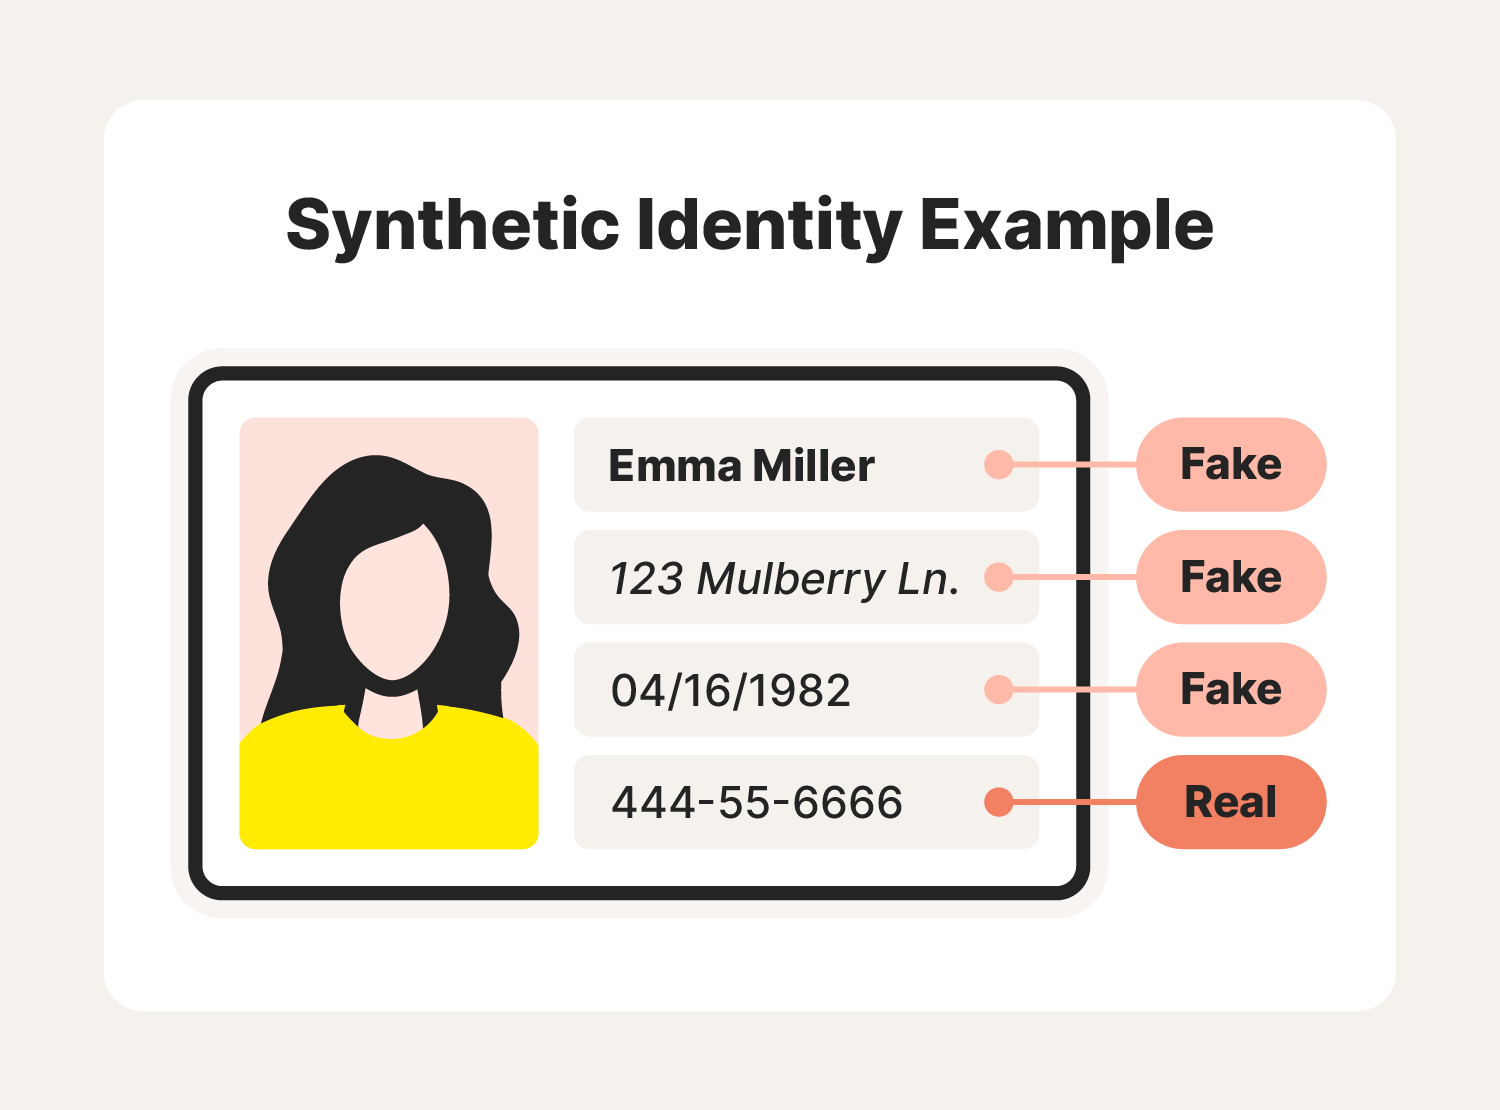 A graphic displays an example of a synthetic identity used for synthetic identity theft.